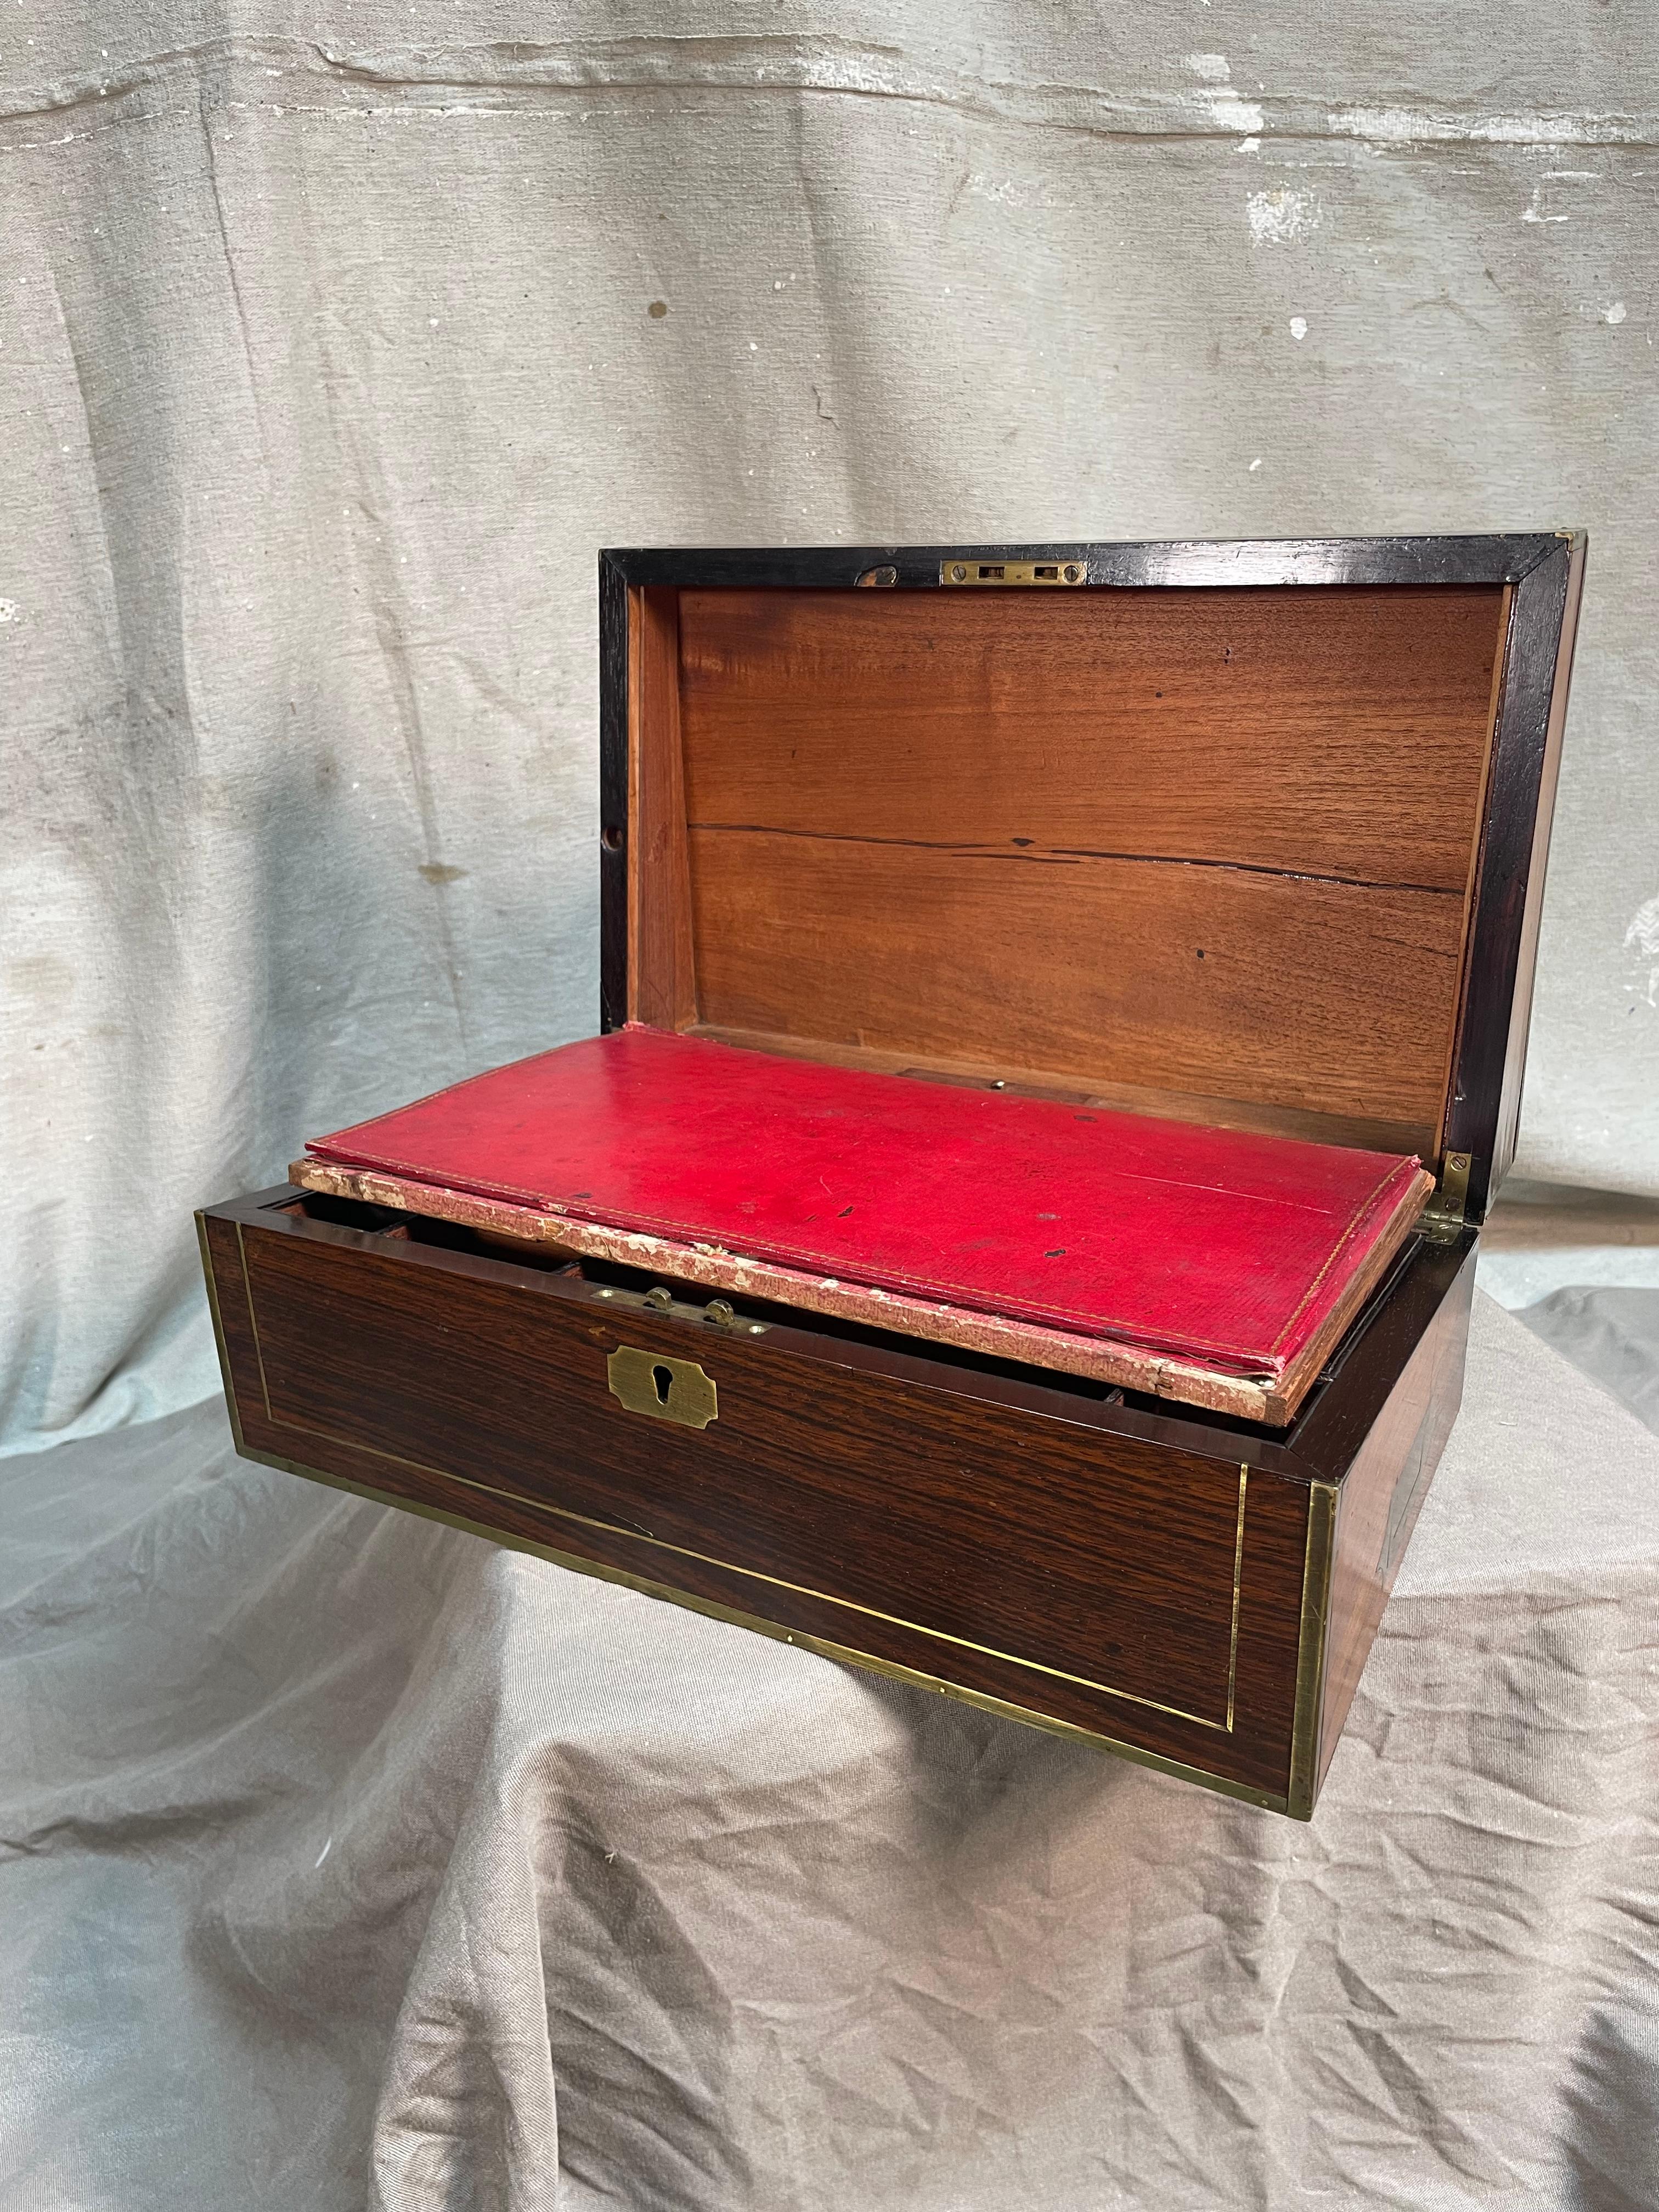 This 19th century laptop is also known as a writing slope, or a lap desk! It became wildly popular in the 19th century because a 